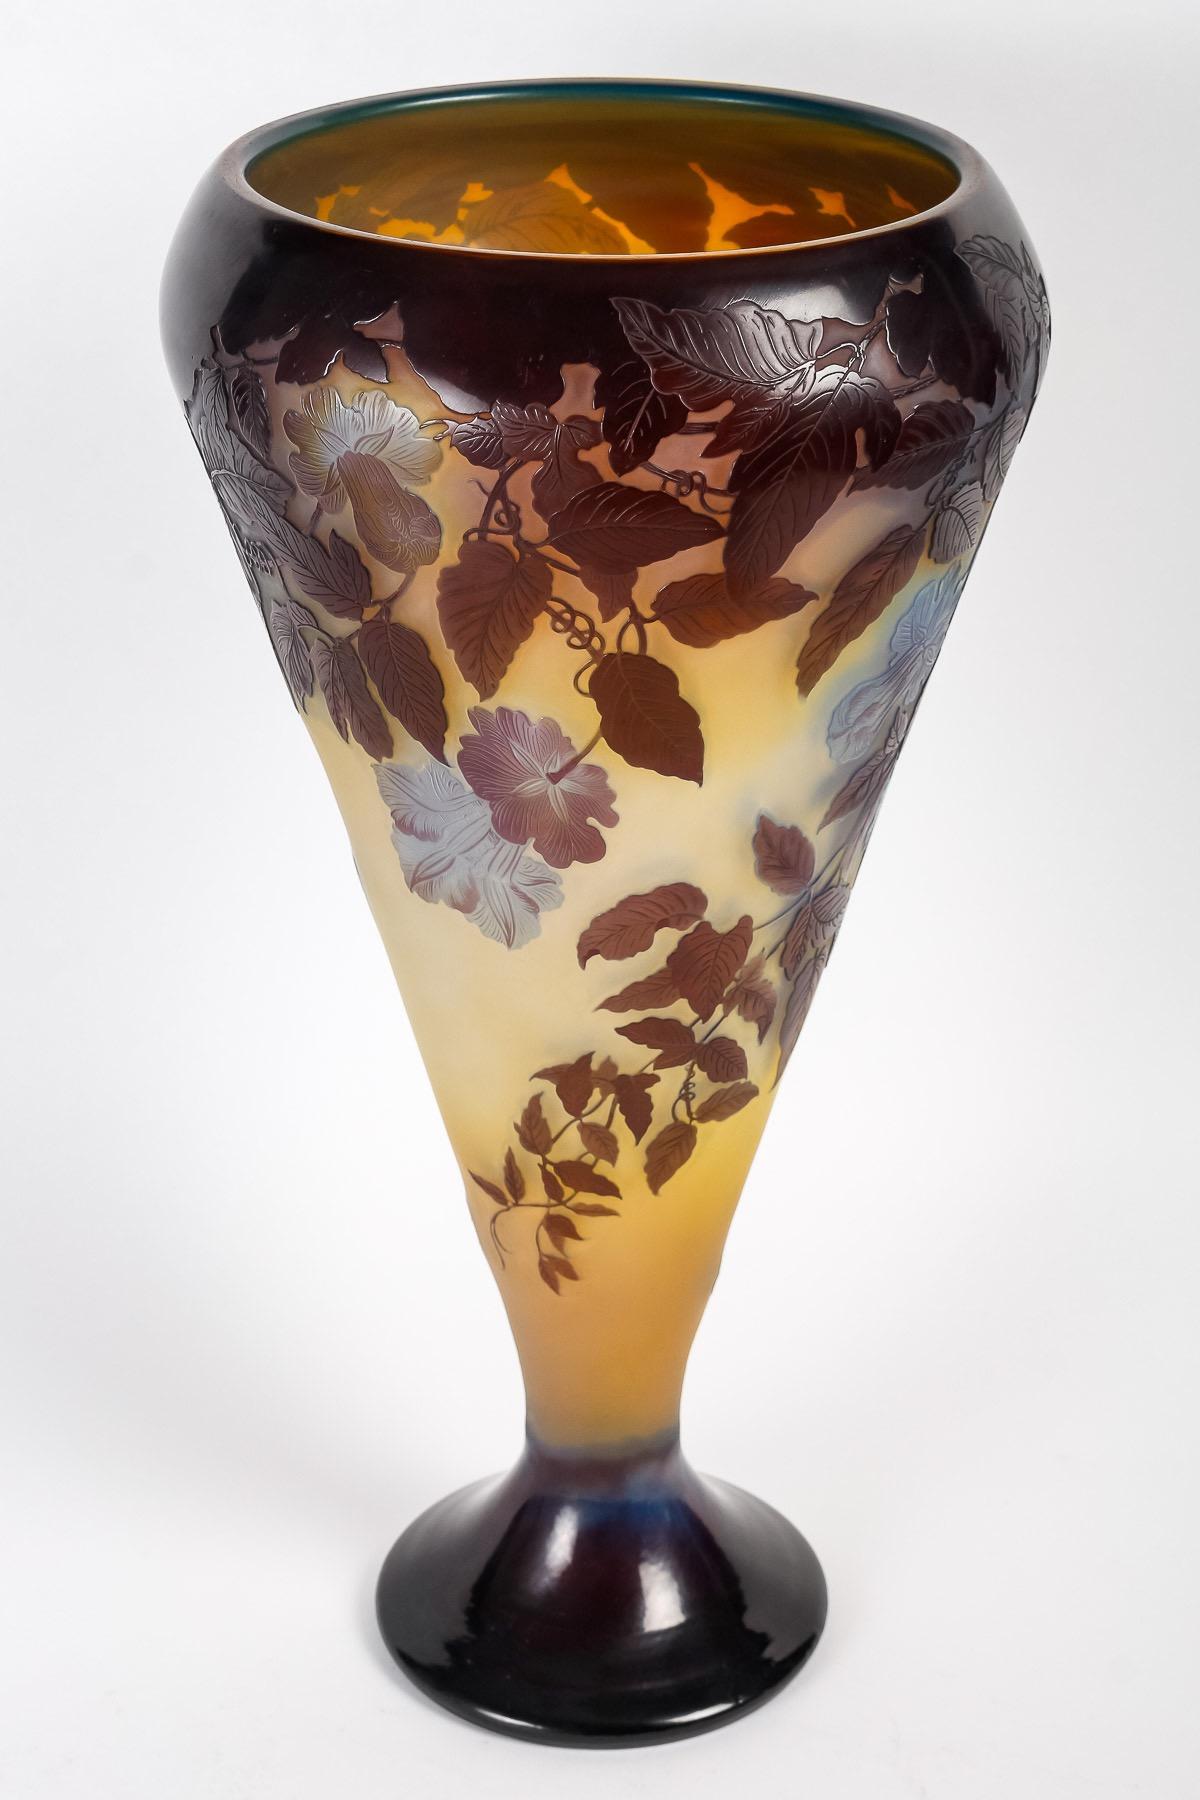 Émile Gallé (1846-1904)
Impressive Gallé French Cameo Glass Vase 
Large vase cone shape on pedestal 
Cased glass, opalescent, colorless, yellow and blue, acid-etched design with 